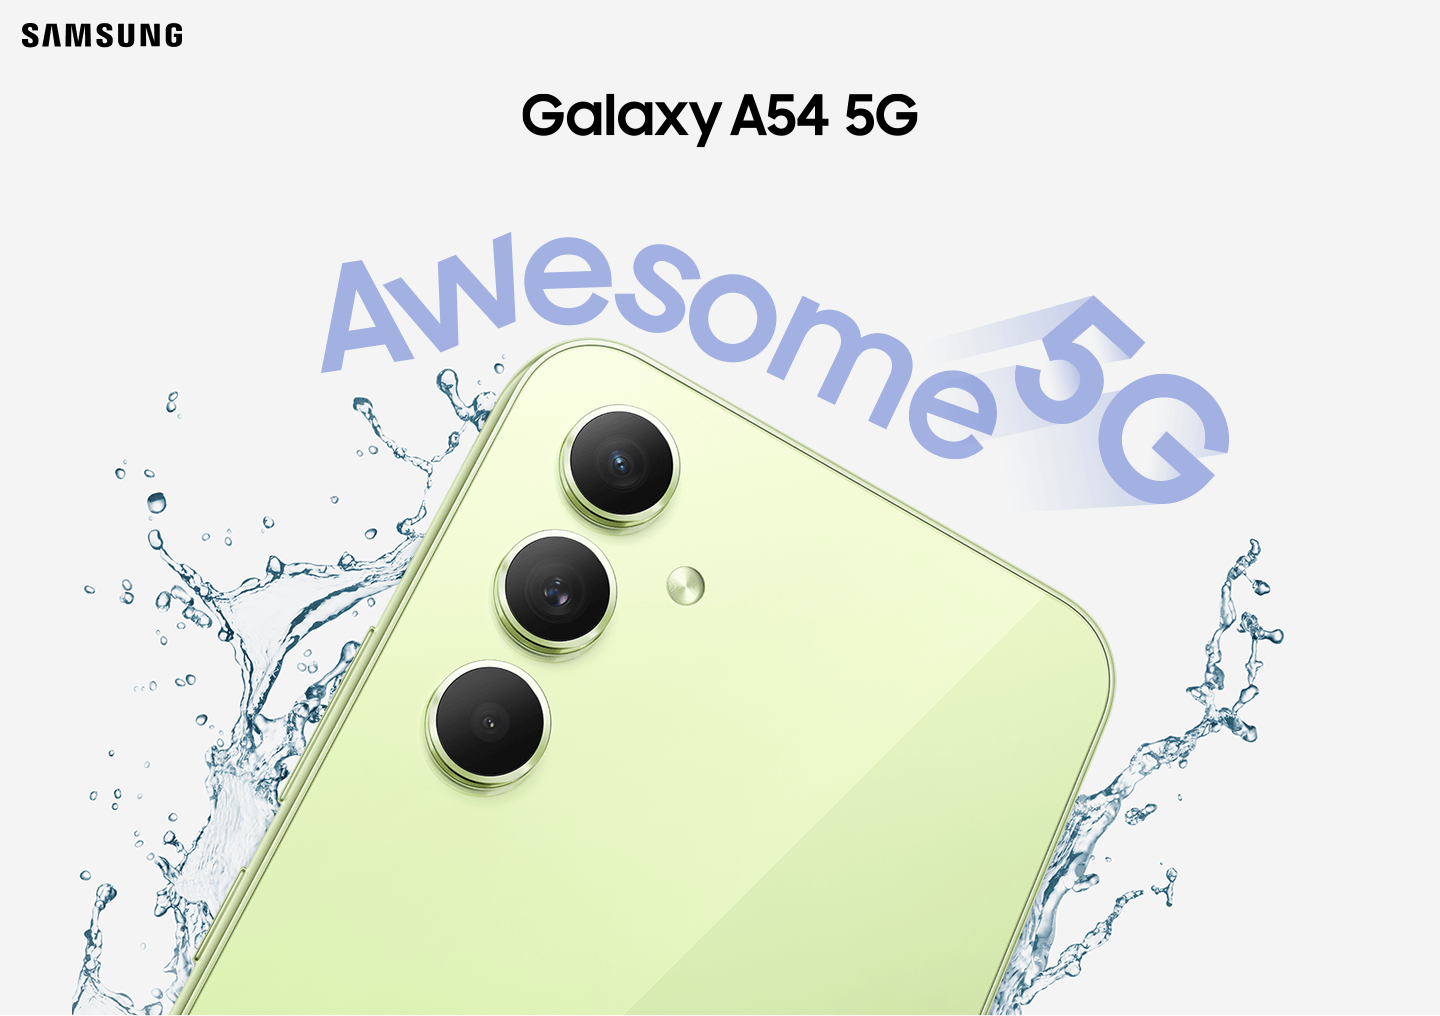 Green A54 device labeled 'Awesome 5G' with a water splash behind it